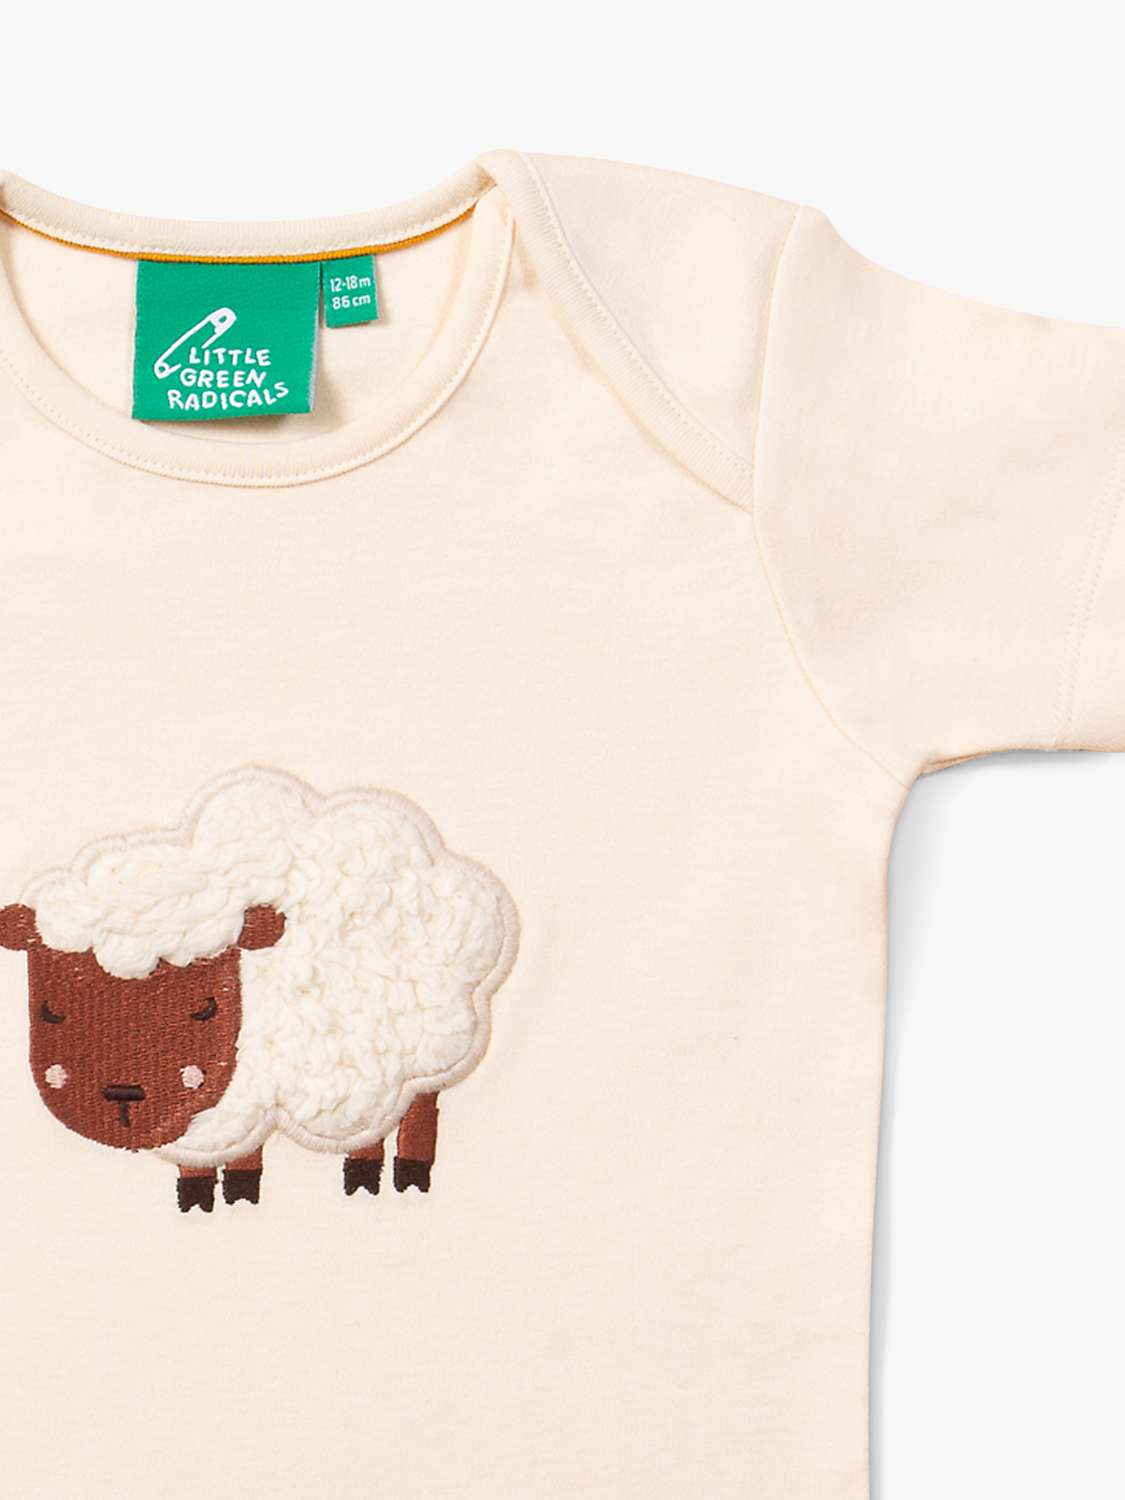 Buy Little Green Radicals Baby Organic Cotton Counting Sheep Applique T-Shirt, Cream Online at johnlewis.com